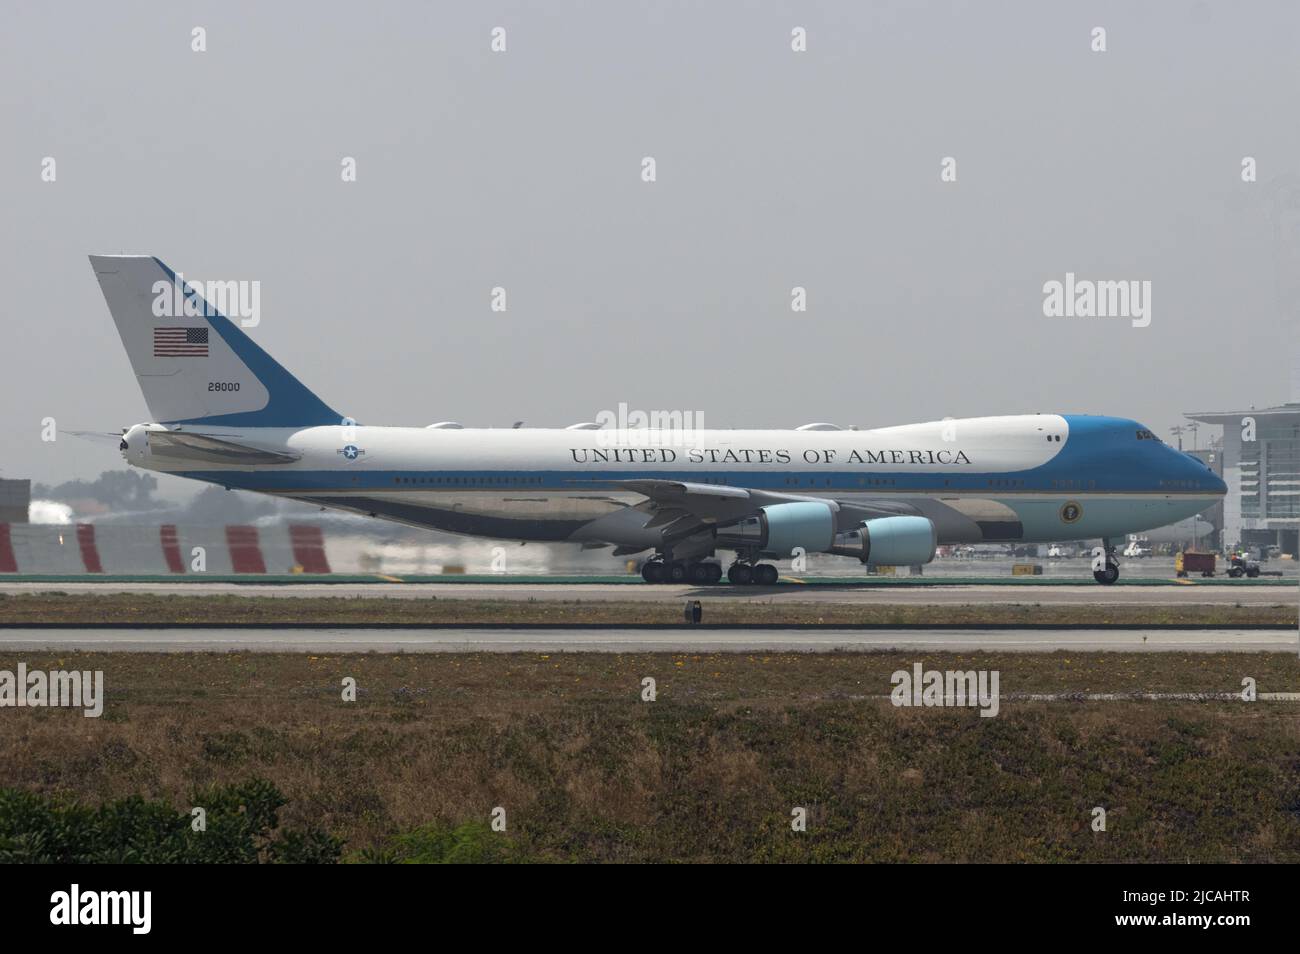 Air Force One, VC-25, with President Biden aboard shown leaving from Los Angeles International Airport, California, USA on June 11, 2022. Stock Photo